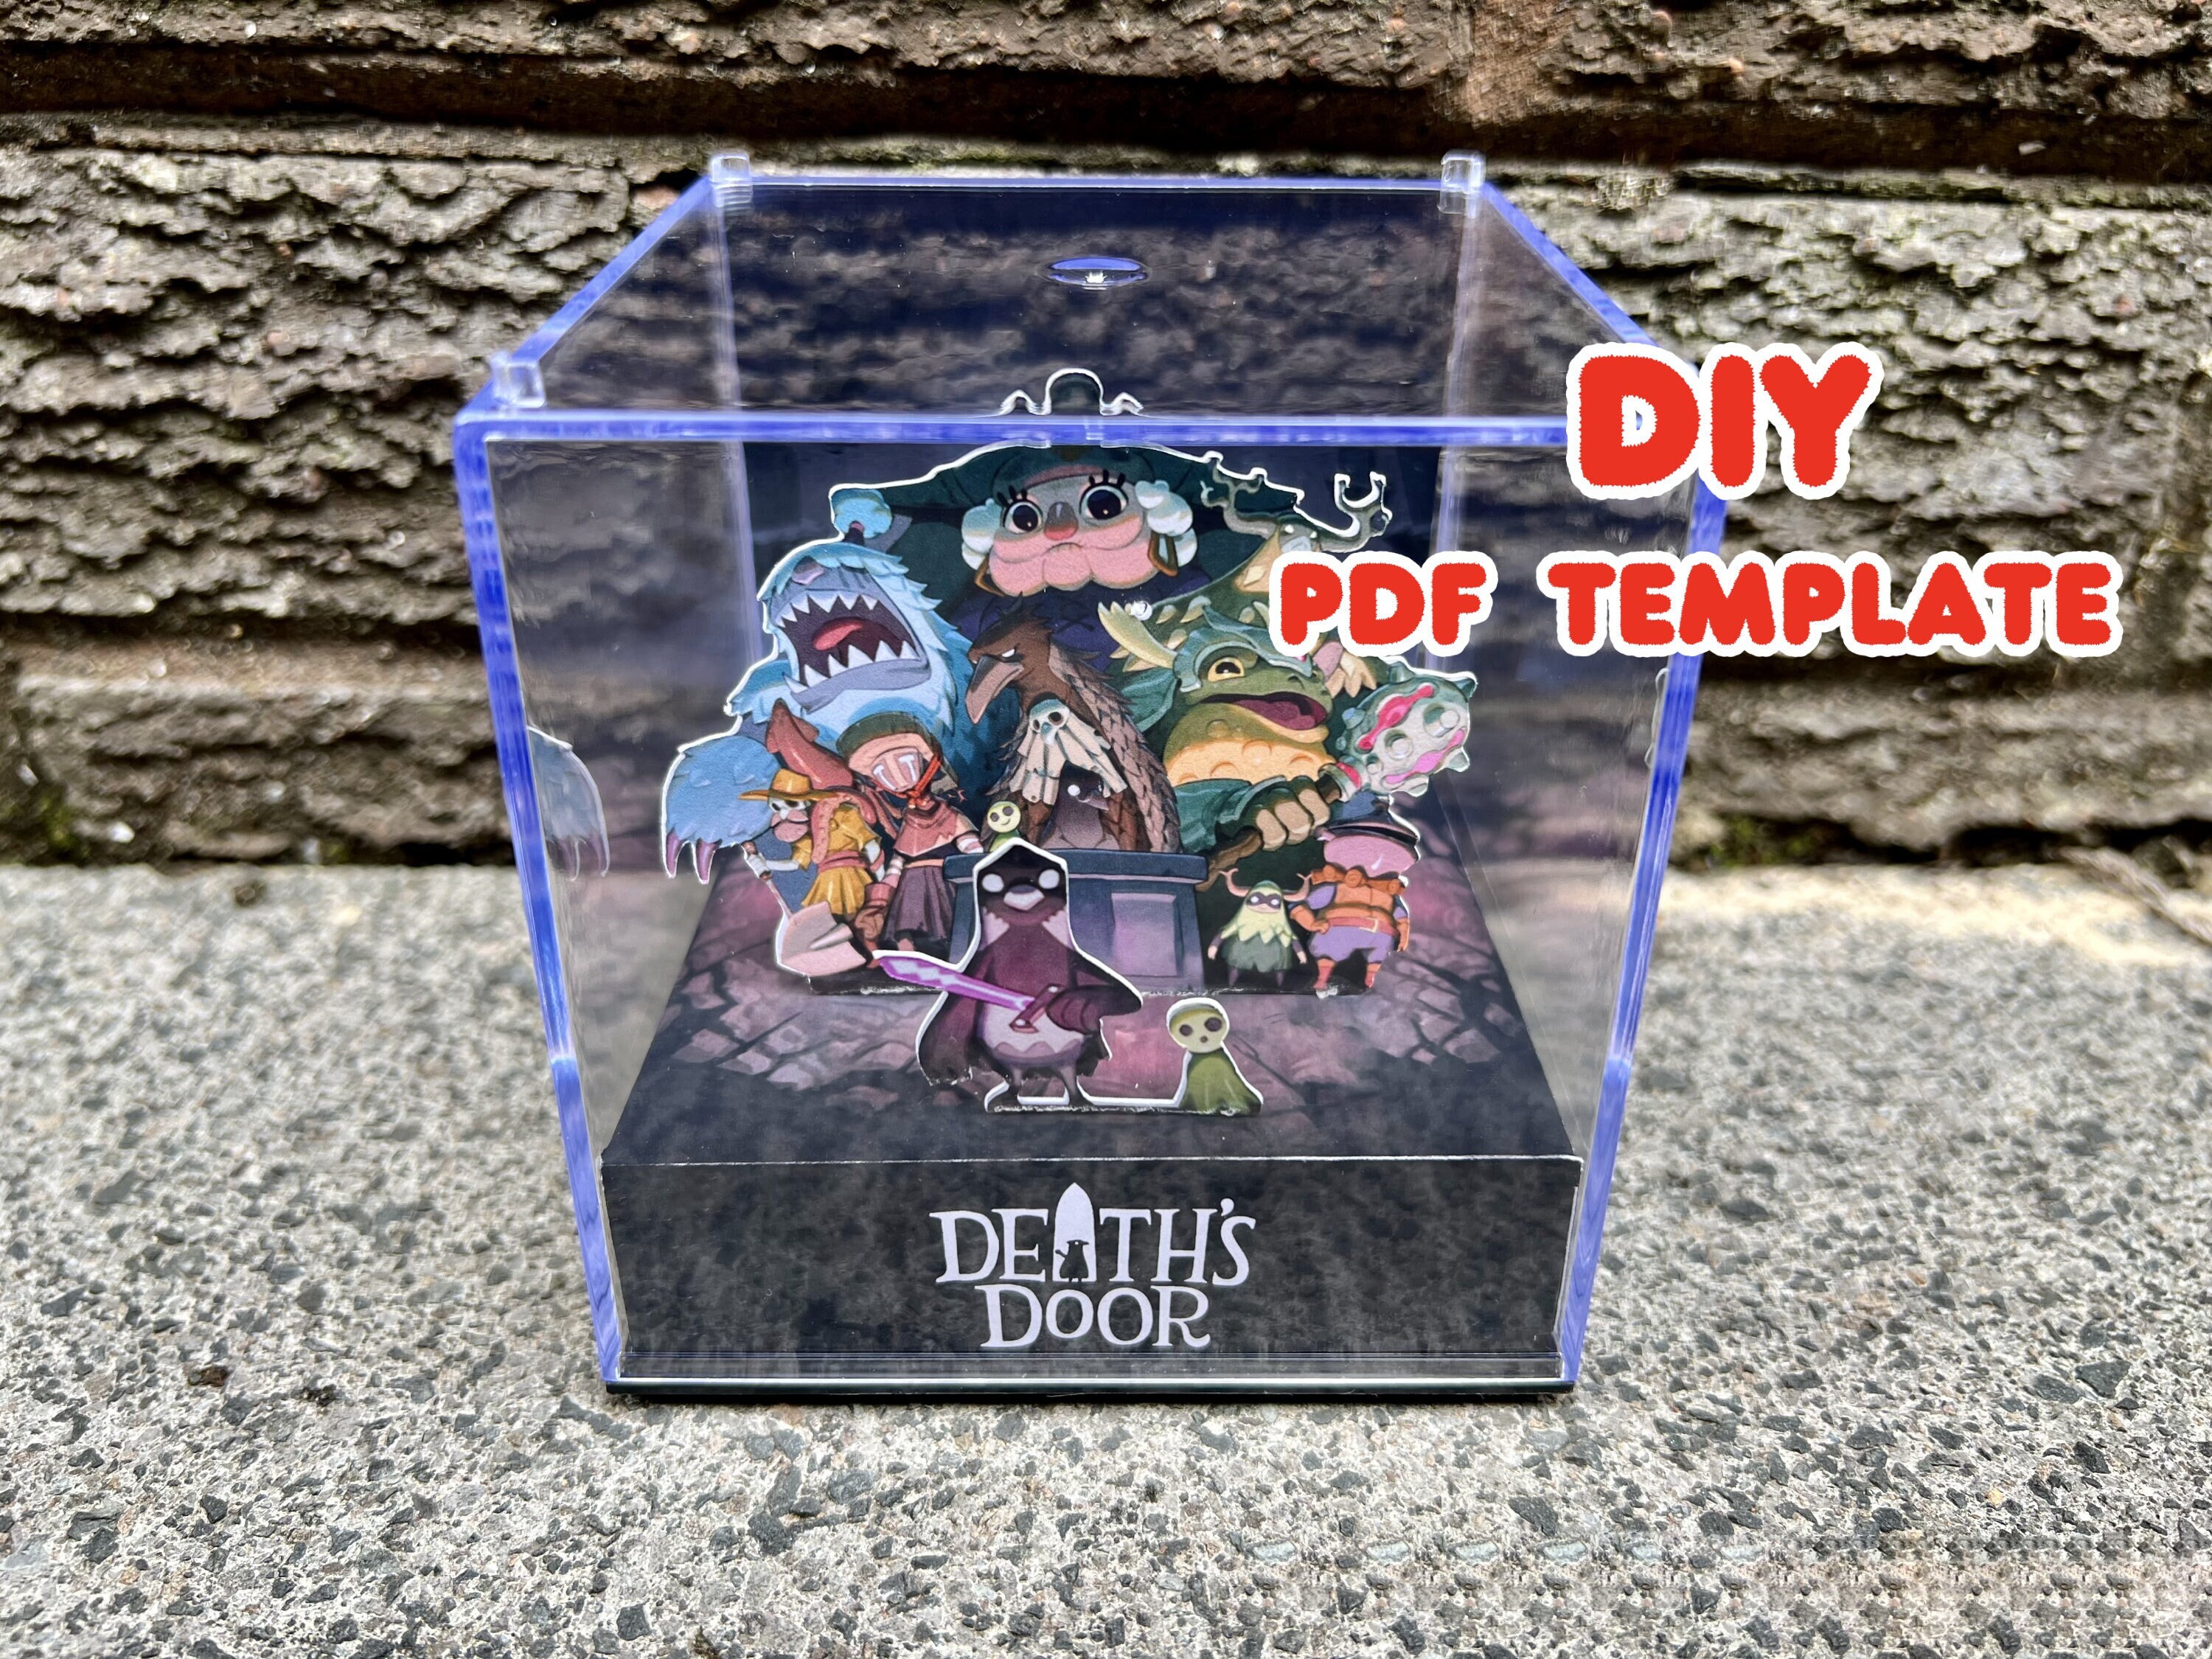 DEATH'S DOOR DIY Template Make Your Own 3D Game Cube Papercraft Diorama 